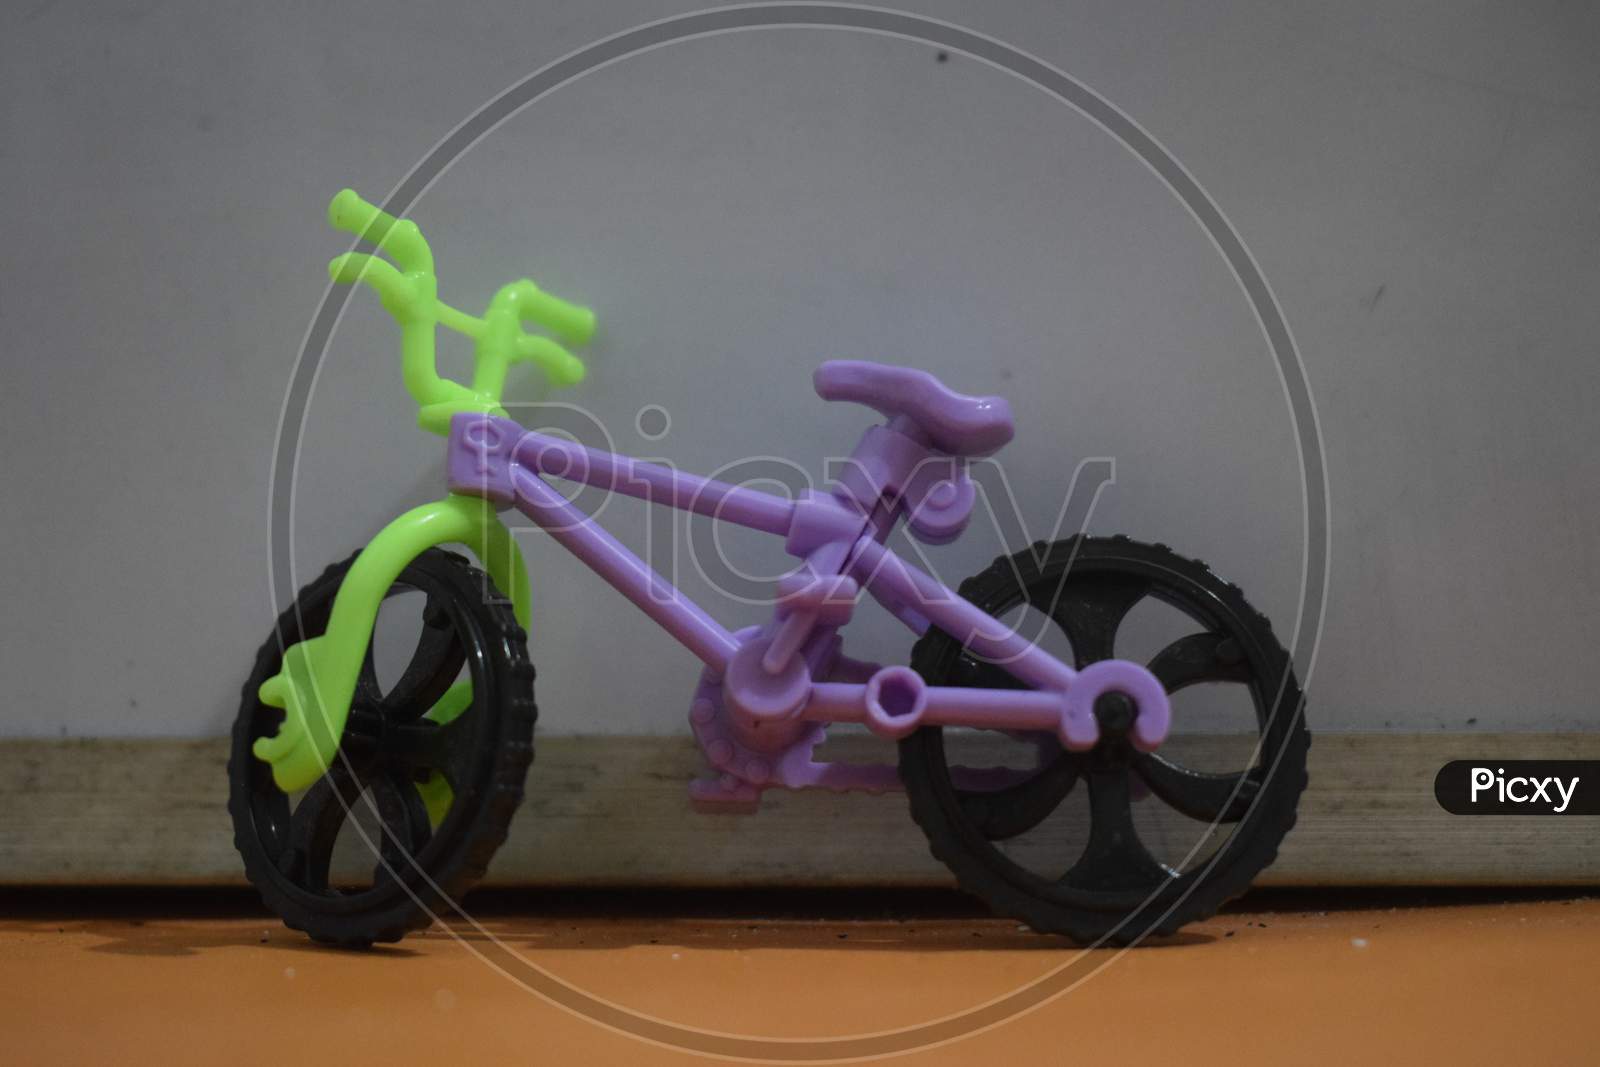 small toy cycle placed with white background